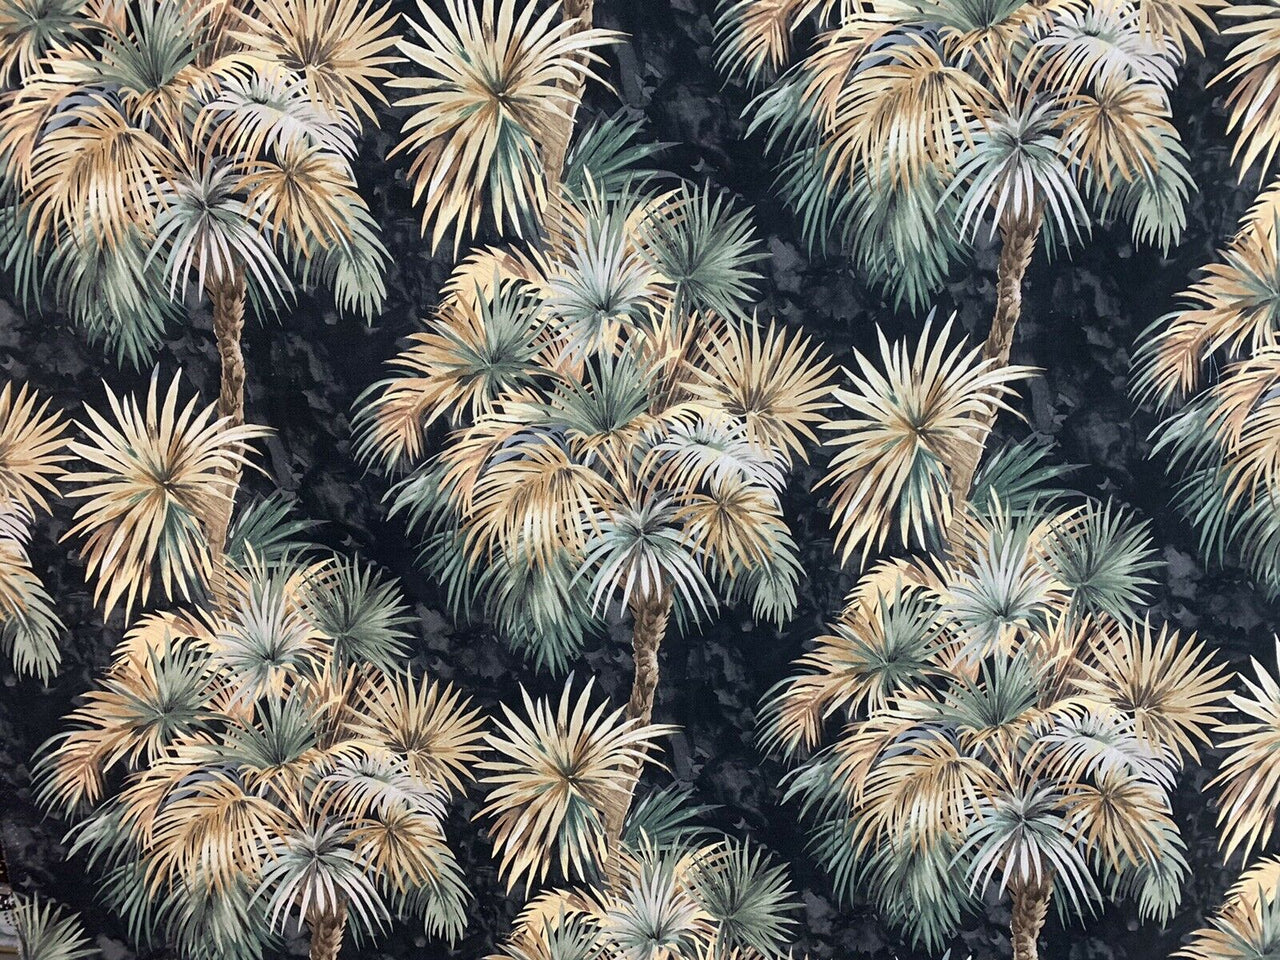 Haiti Palm Trees Black Cotton Fabric by Meter Yellow Floral Sewing Material Botanical Digital Print Textile